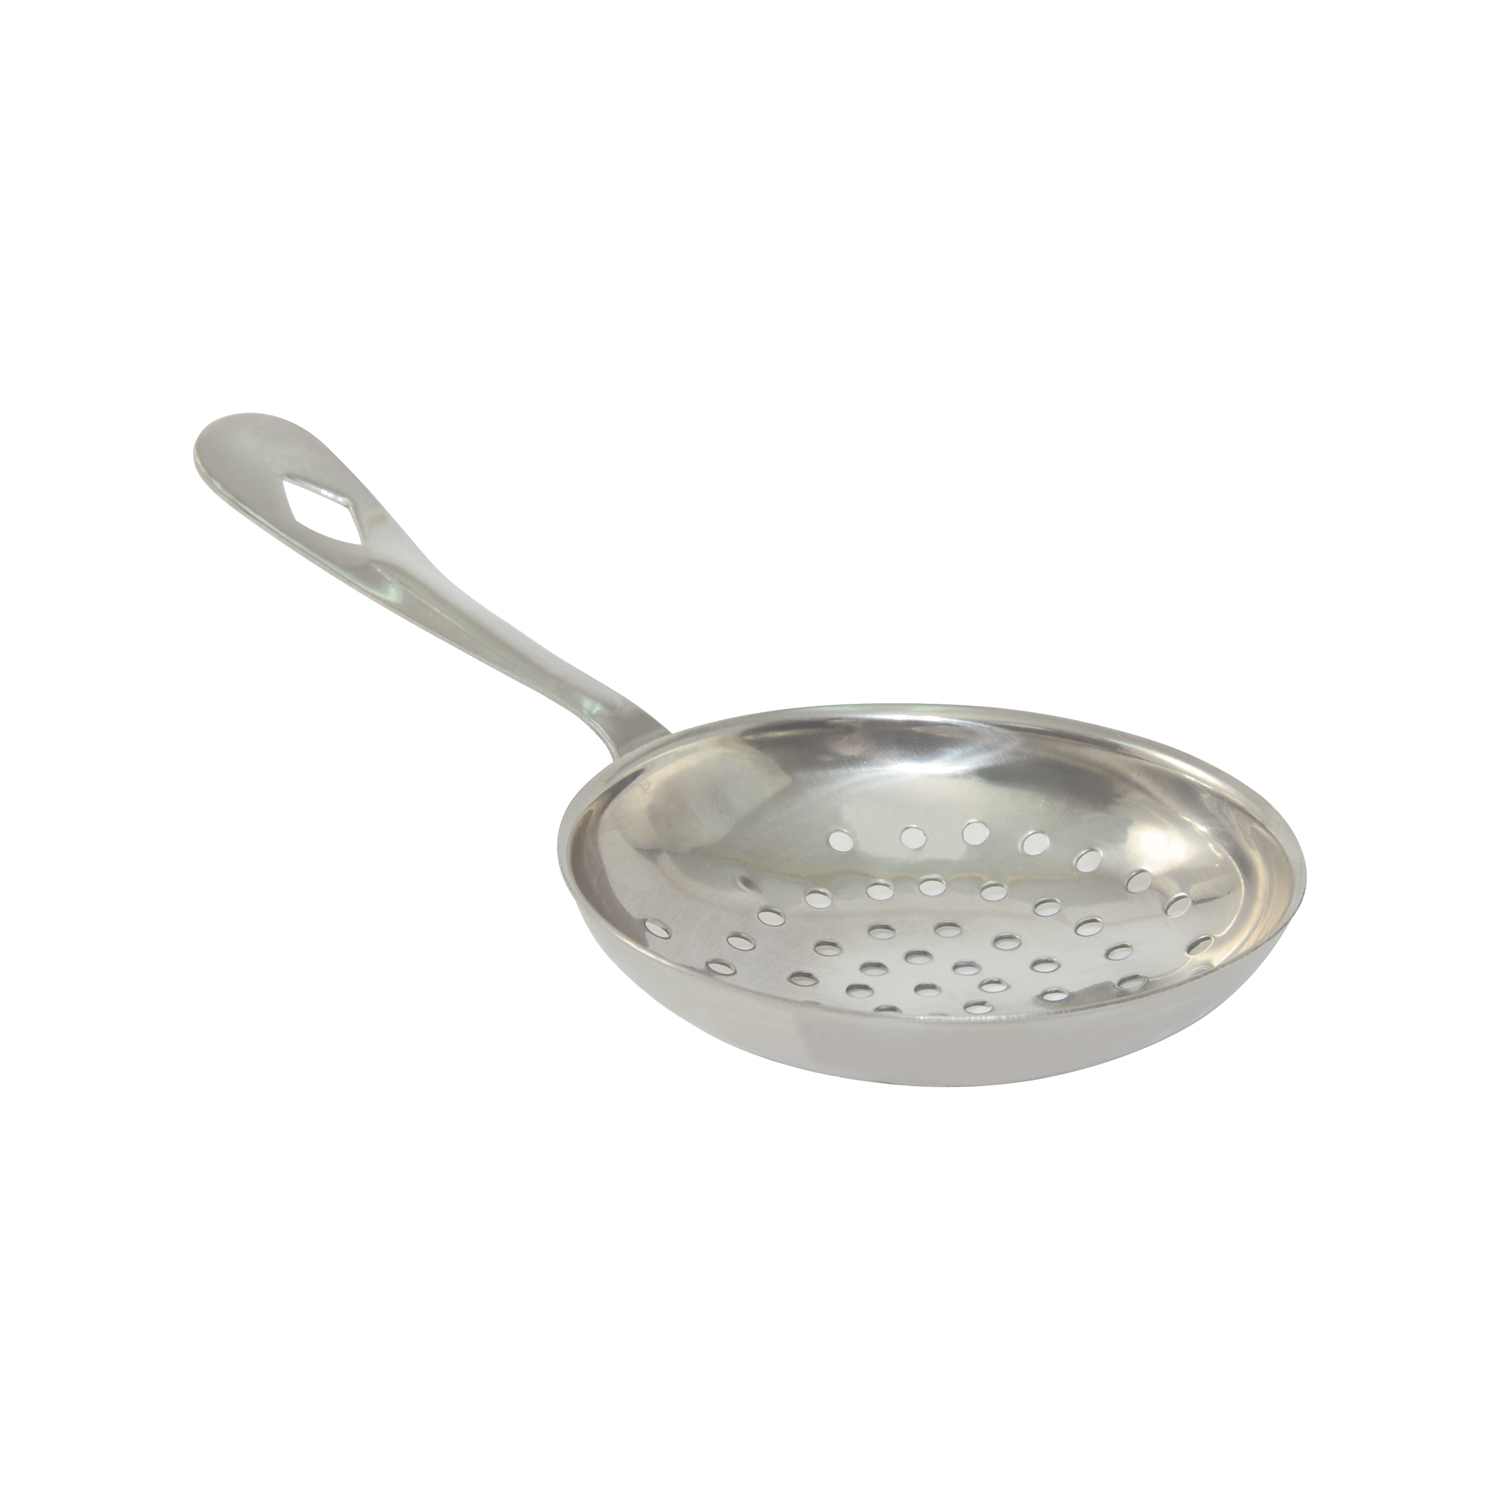 CAC China KUJP-6 Stainless Steel Julep Strainer 6-1/4"L